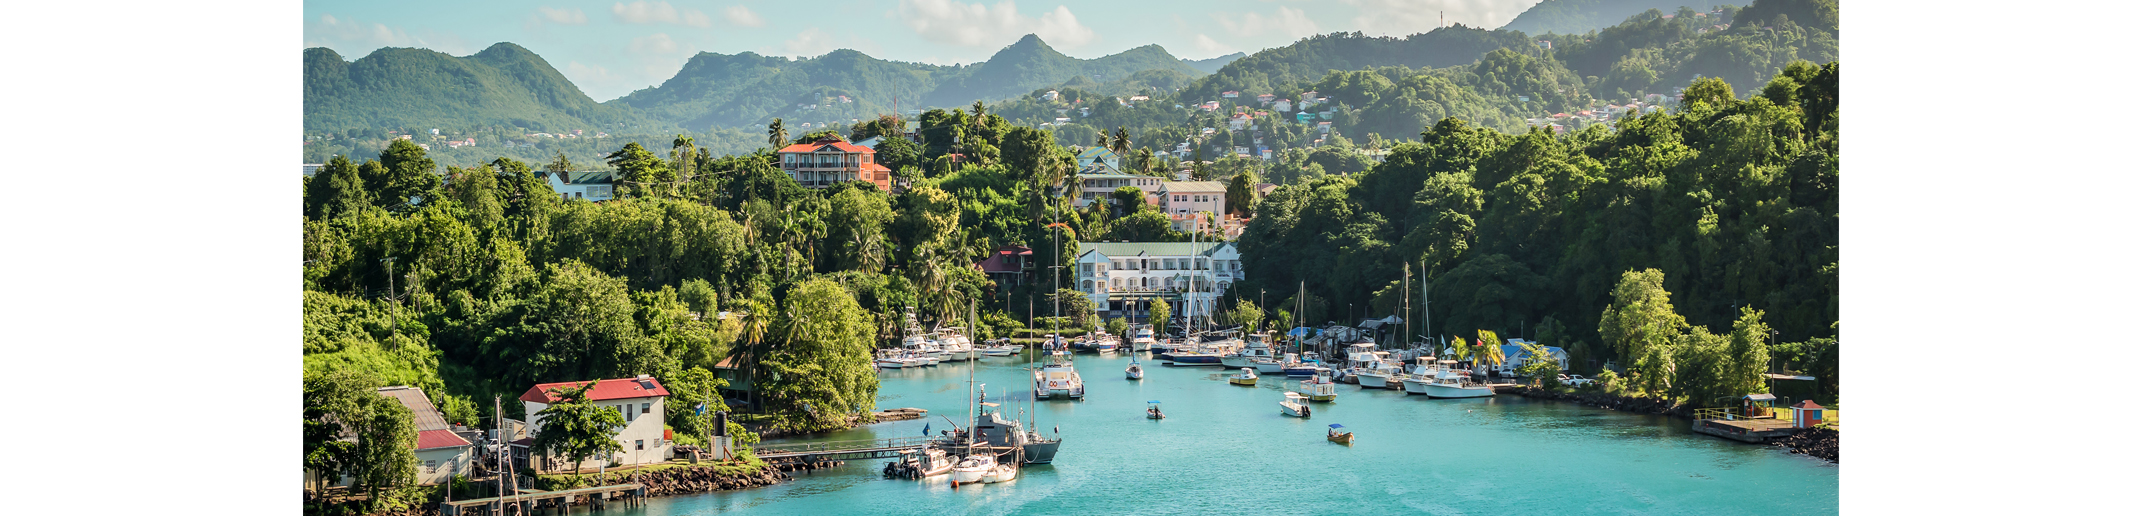 Saint Lucia benefits from the debt service suspension initiative